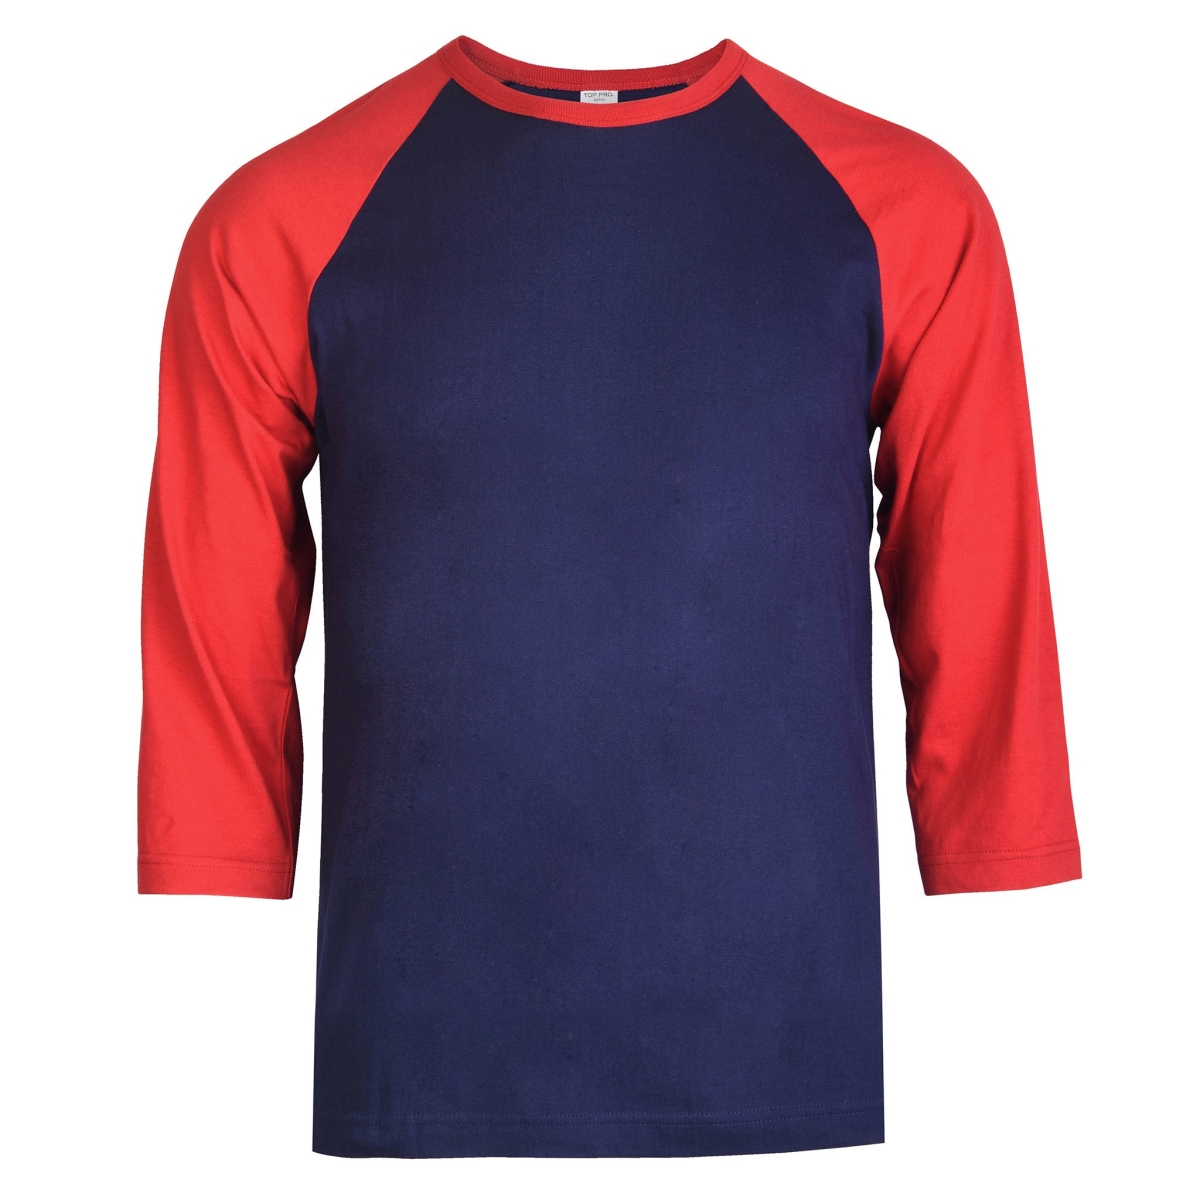 Picture of 247 Frenzy 247-MBT001 DRN-SM Mens Essentials Top Pro 0.75 Sleeve Raglan Baseball T-Shirt&#44; Dark Red & Navy - Small